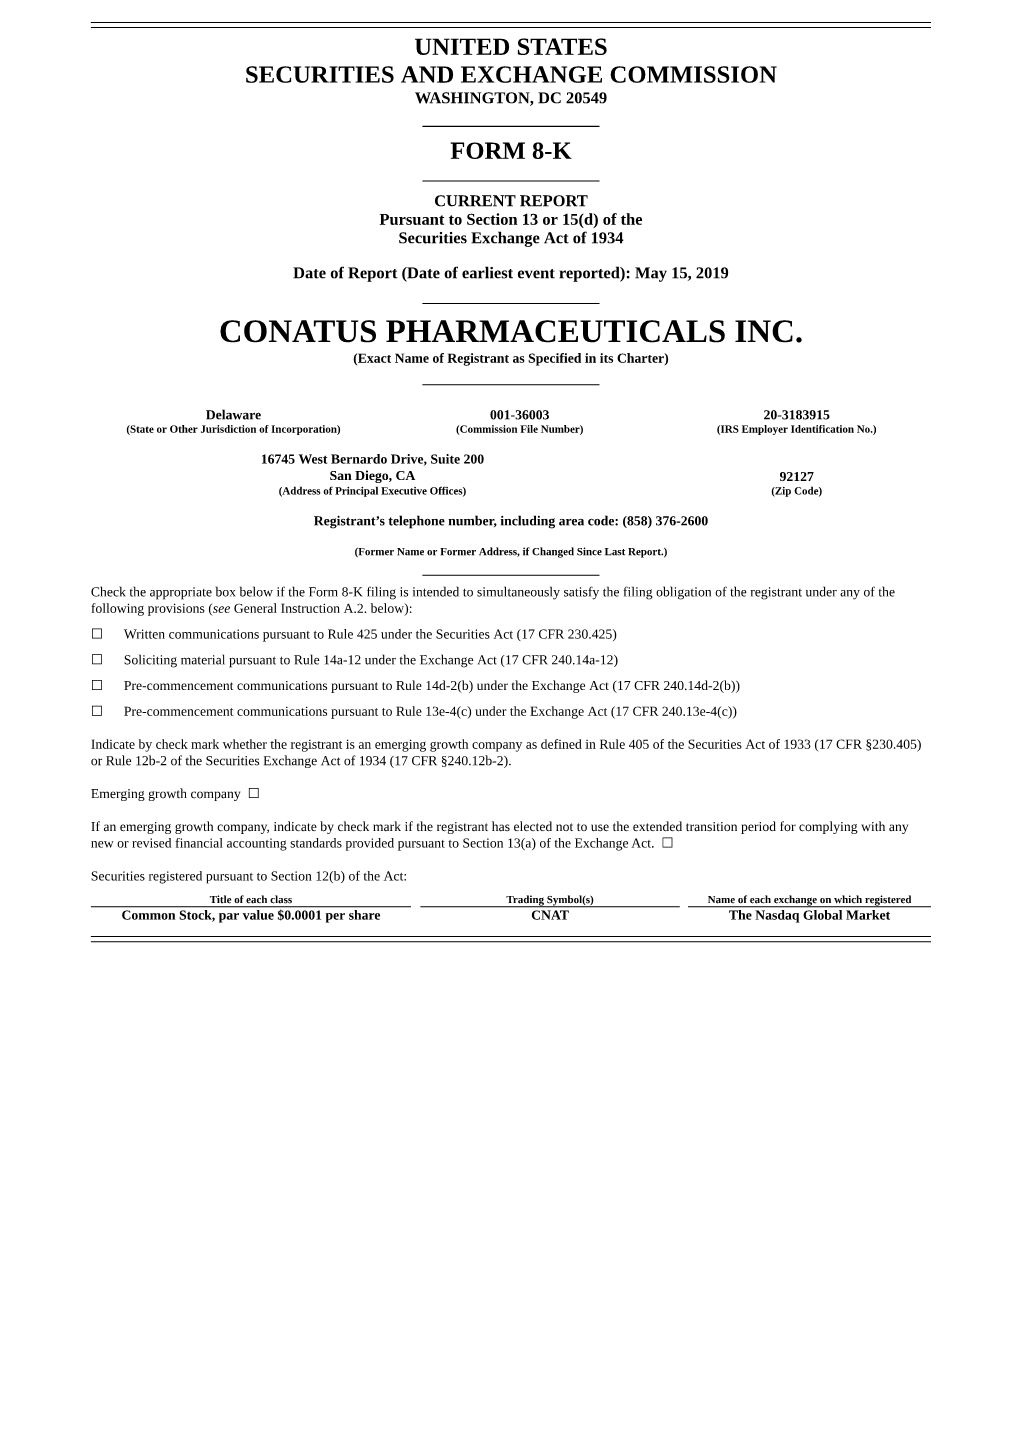 CONATUS PHARMACEUTICALS INC. (Exact Name of Registrant As Specified in Its Charter)